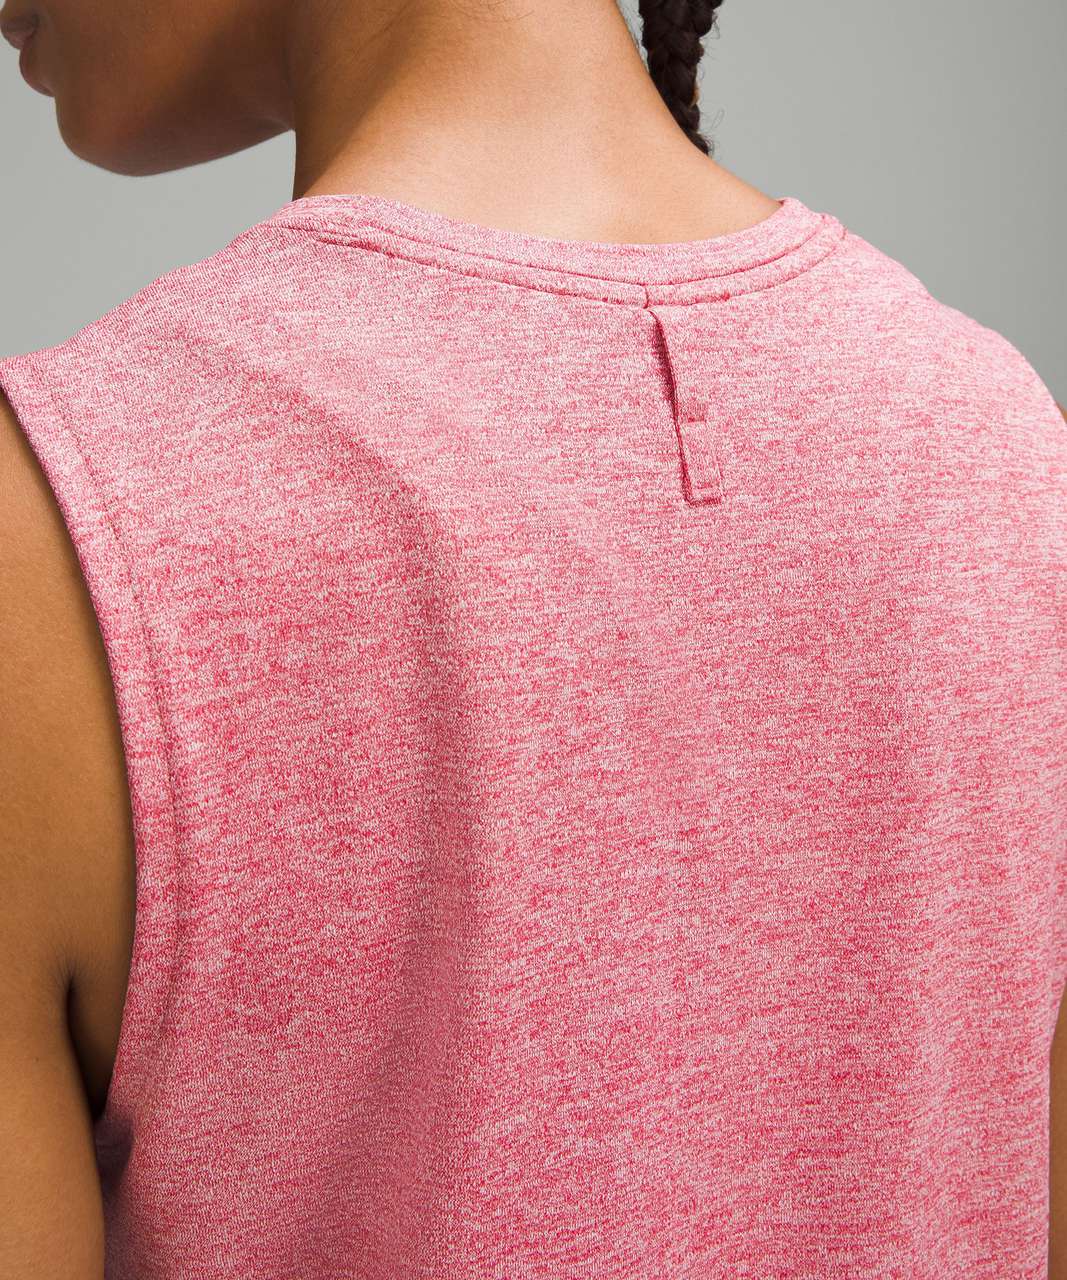 Lululemon License to Train Classic-Fit Tank Top - Heathered Vintage Rose